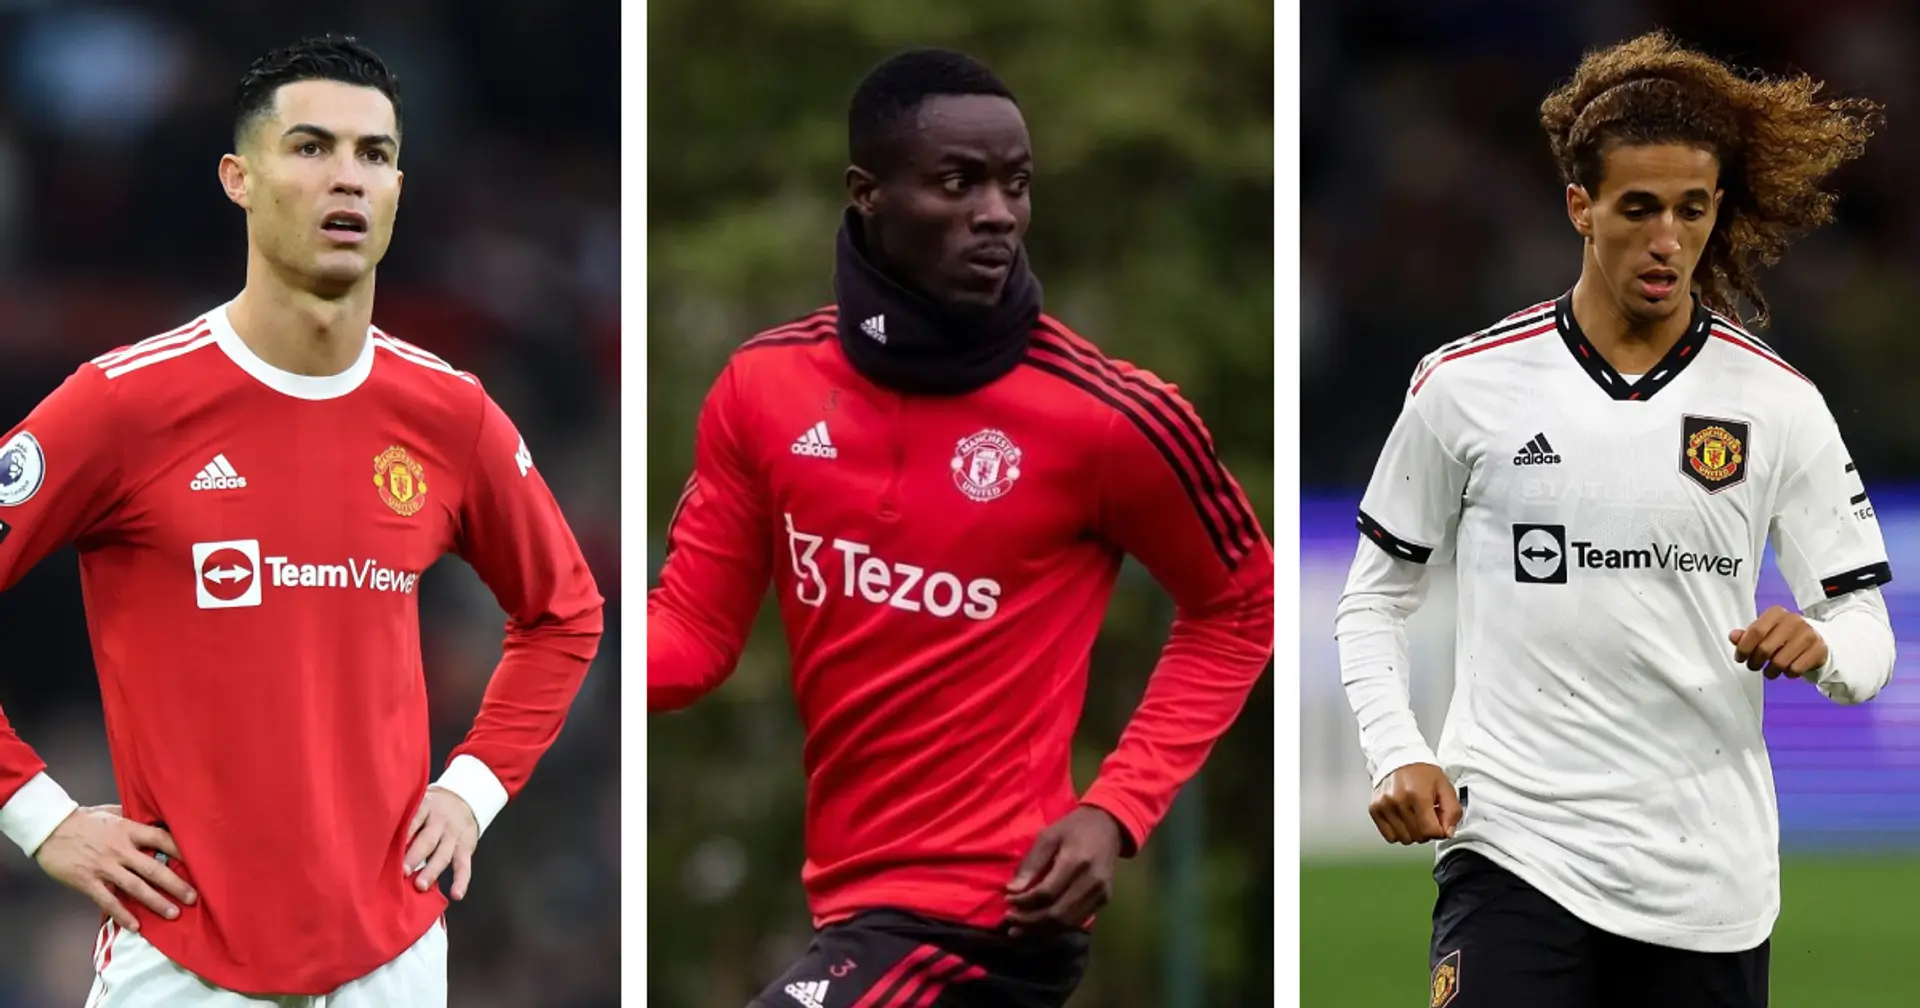 Keep, sell or loan: what the future should hold for every Man United player